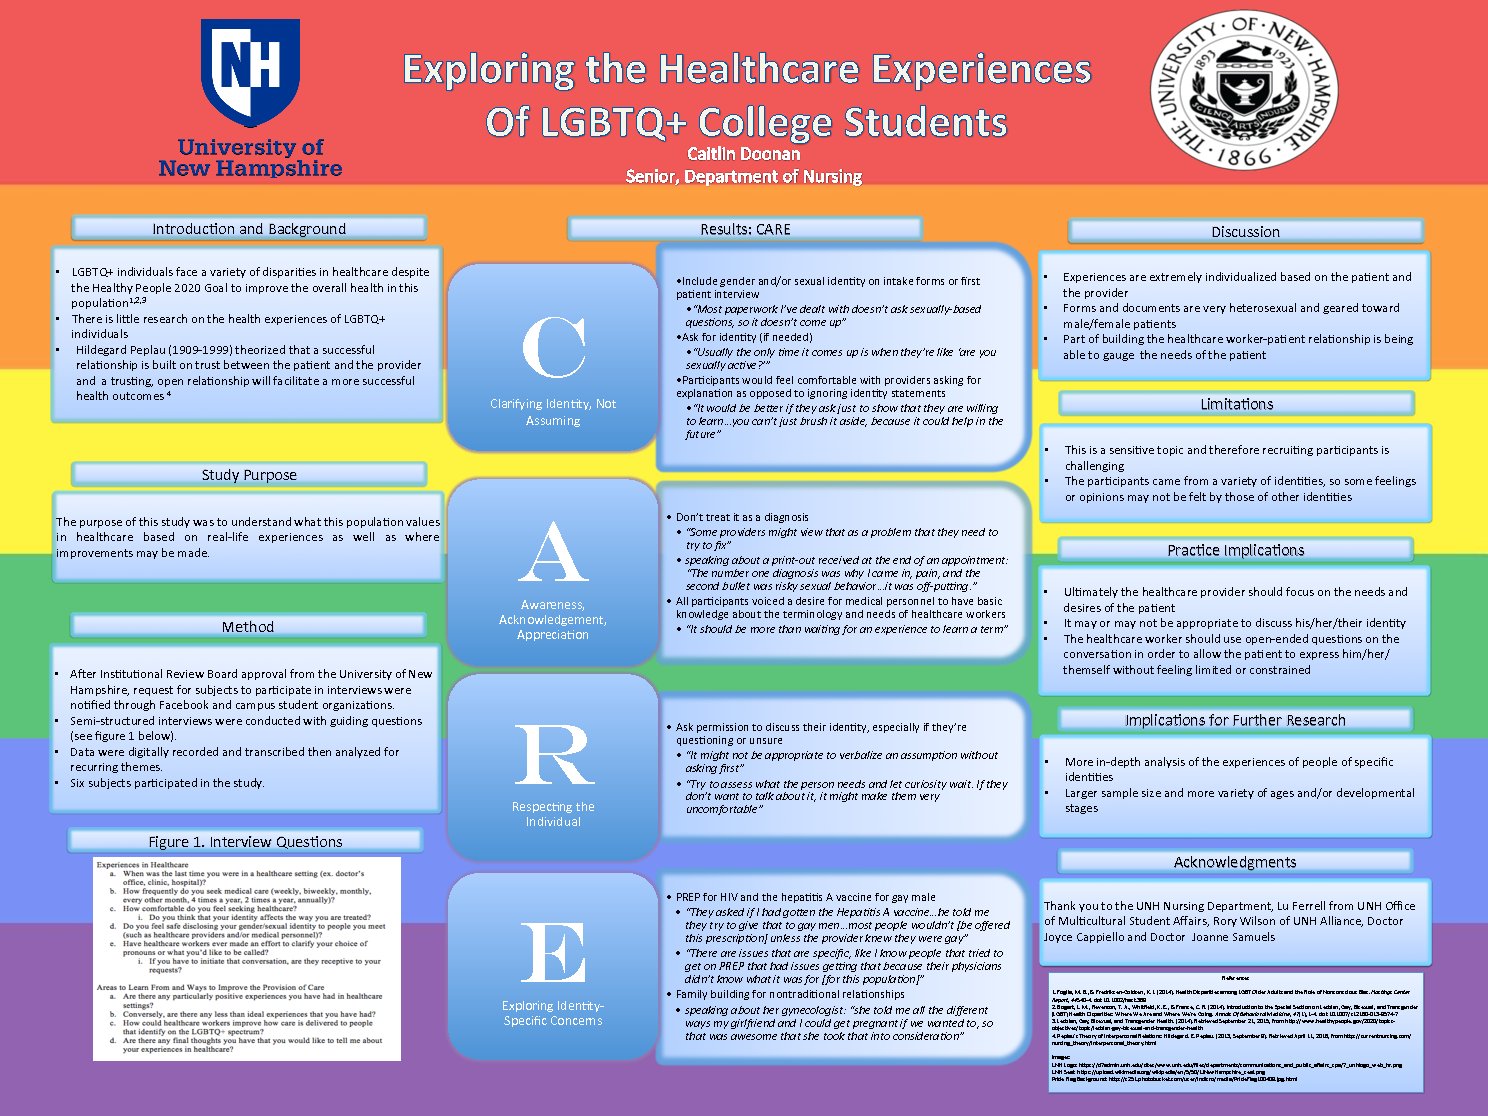 Exploring The Healthcare Experiences Of Lgbtq+ College Students by cmo258